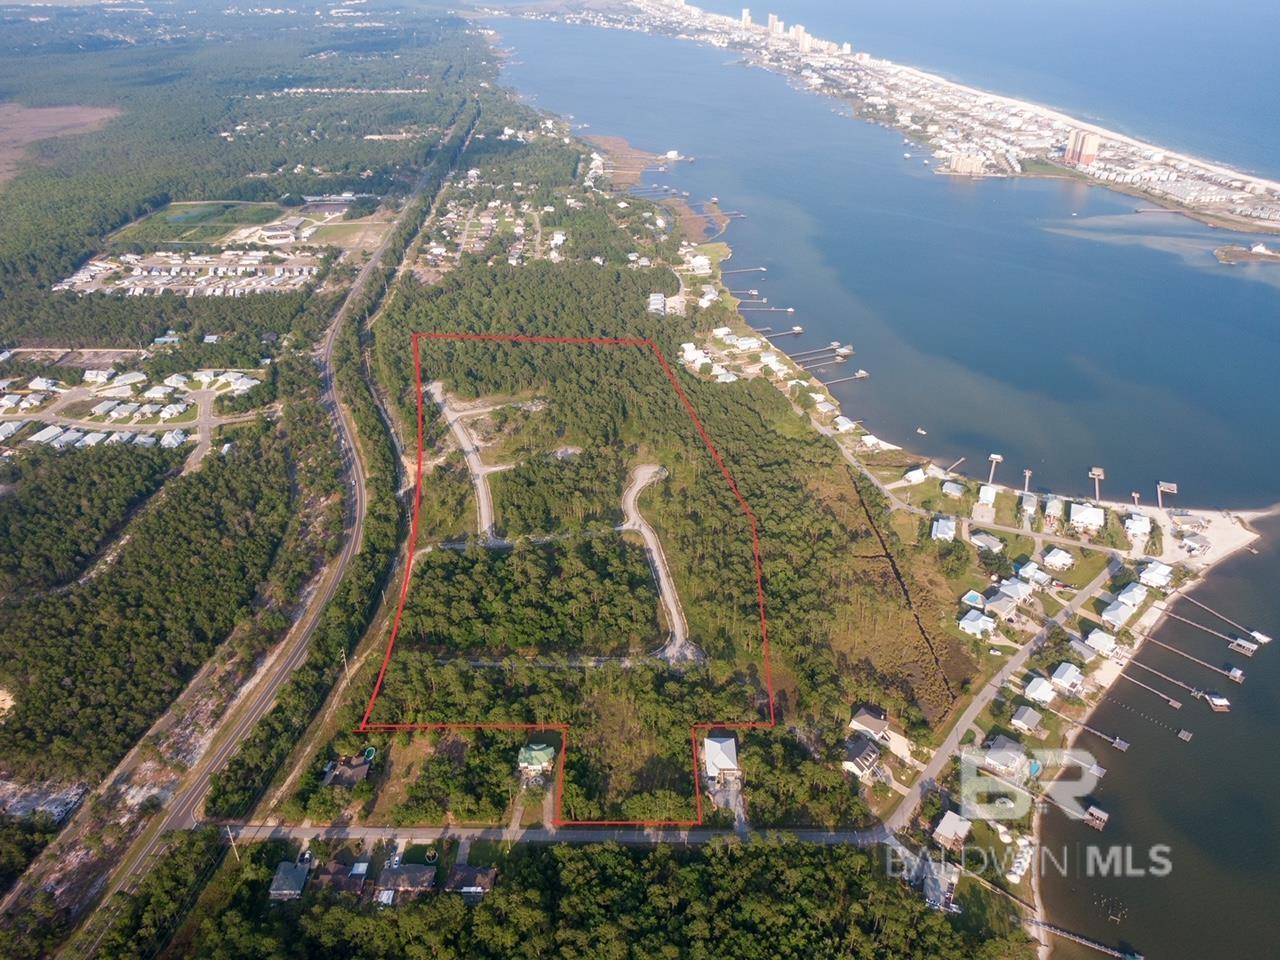 CALLING ALL INVESTORS!  Welcome to your own private oasis! This stunning 40-acre property with about 1800 feet of Fort Morgan Road Frontage is located on Fort Morgan Road, just minutes away from the beautiful Little Lagoon. With its prime location in the highly sought-after Gulf Shores school district, this property is perfect for families looking to build their dream home or for investors looking to develop a new community.   The property features a mix of wooded and cleared areas, providing ample space for a variety of uses. Whether you're looking to build a sprawling estate or develop, this property has endless possibilities.  Don't miss out on the opportunity to own this incredible piece of land. Contact us today to schedule a showing and start planning your future on this beautiful property.  Infrastructure set up, No Active Utilities in place. Zoned R-1-5 All information deemed reliable but not guaranteed, Buyer/Buyer's Agent to verify